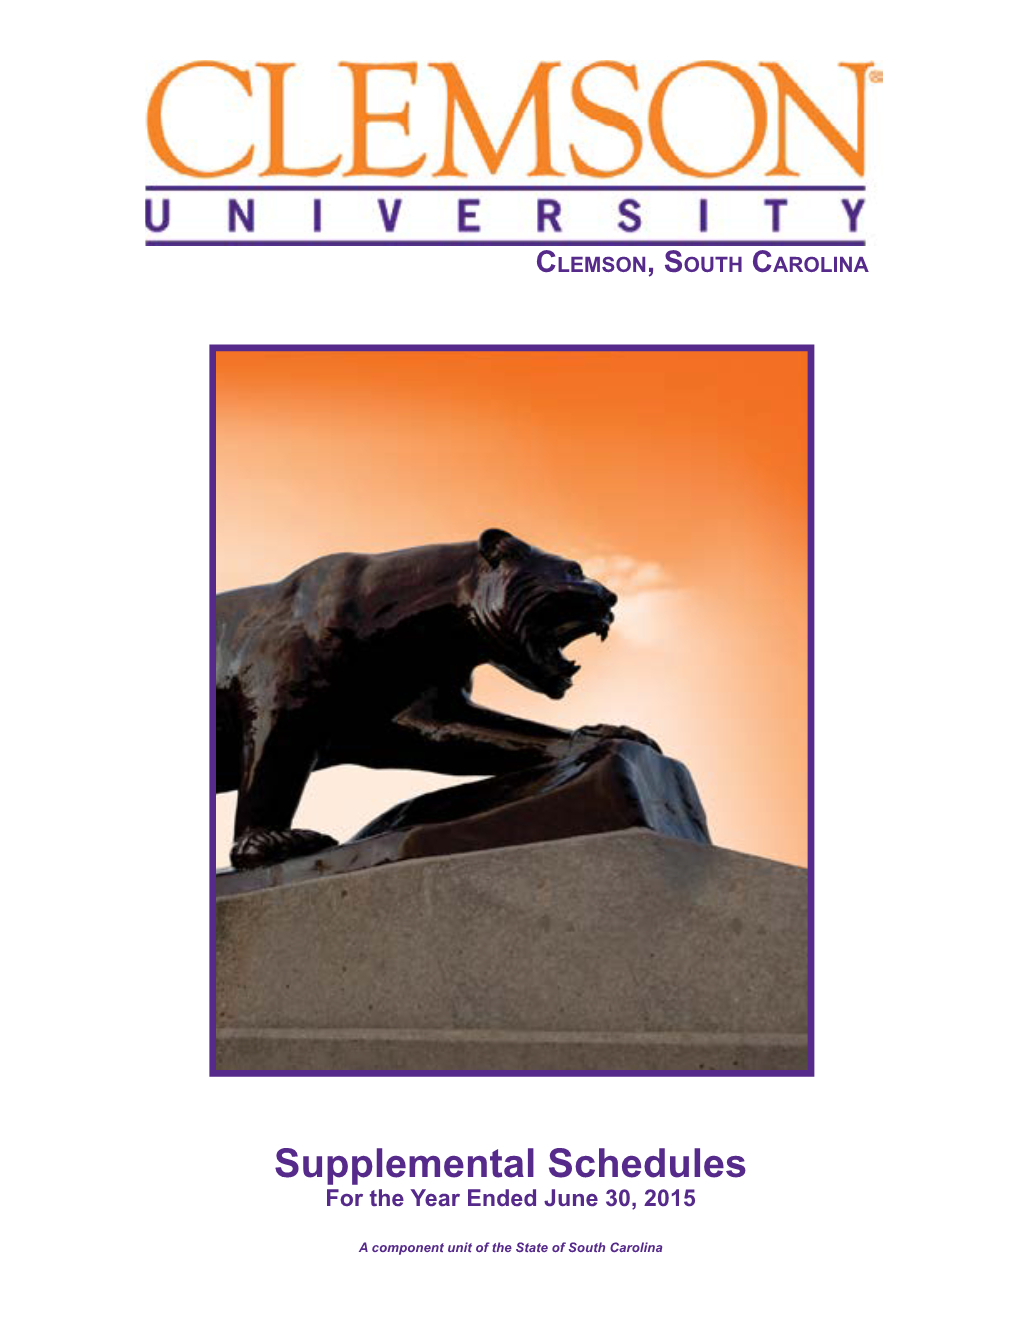 Supplemental Schedules for the Year Ended June 30, 2015